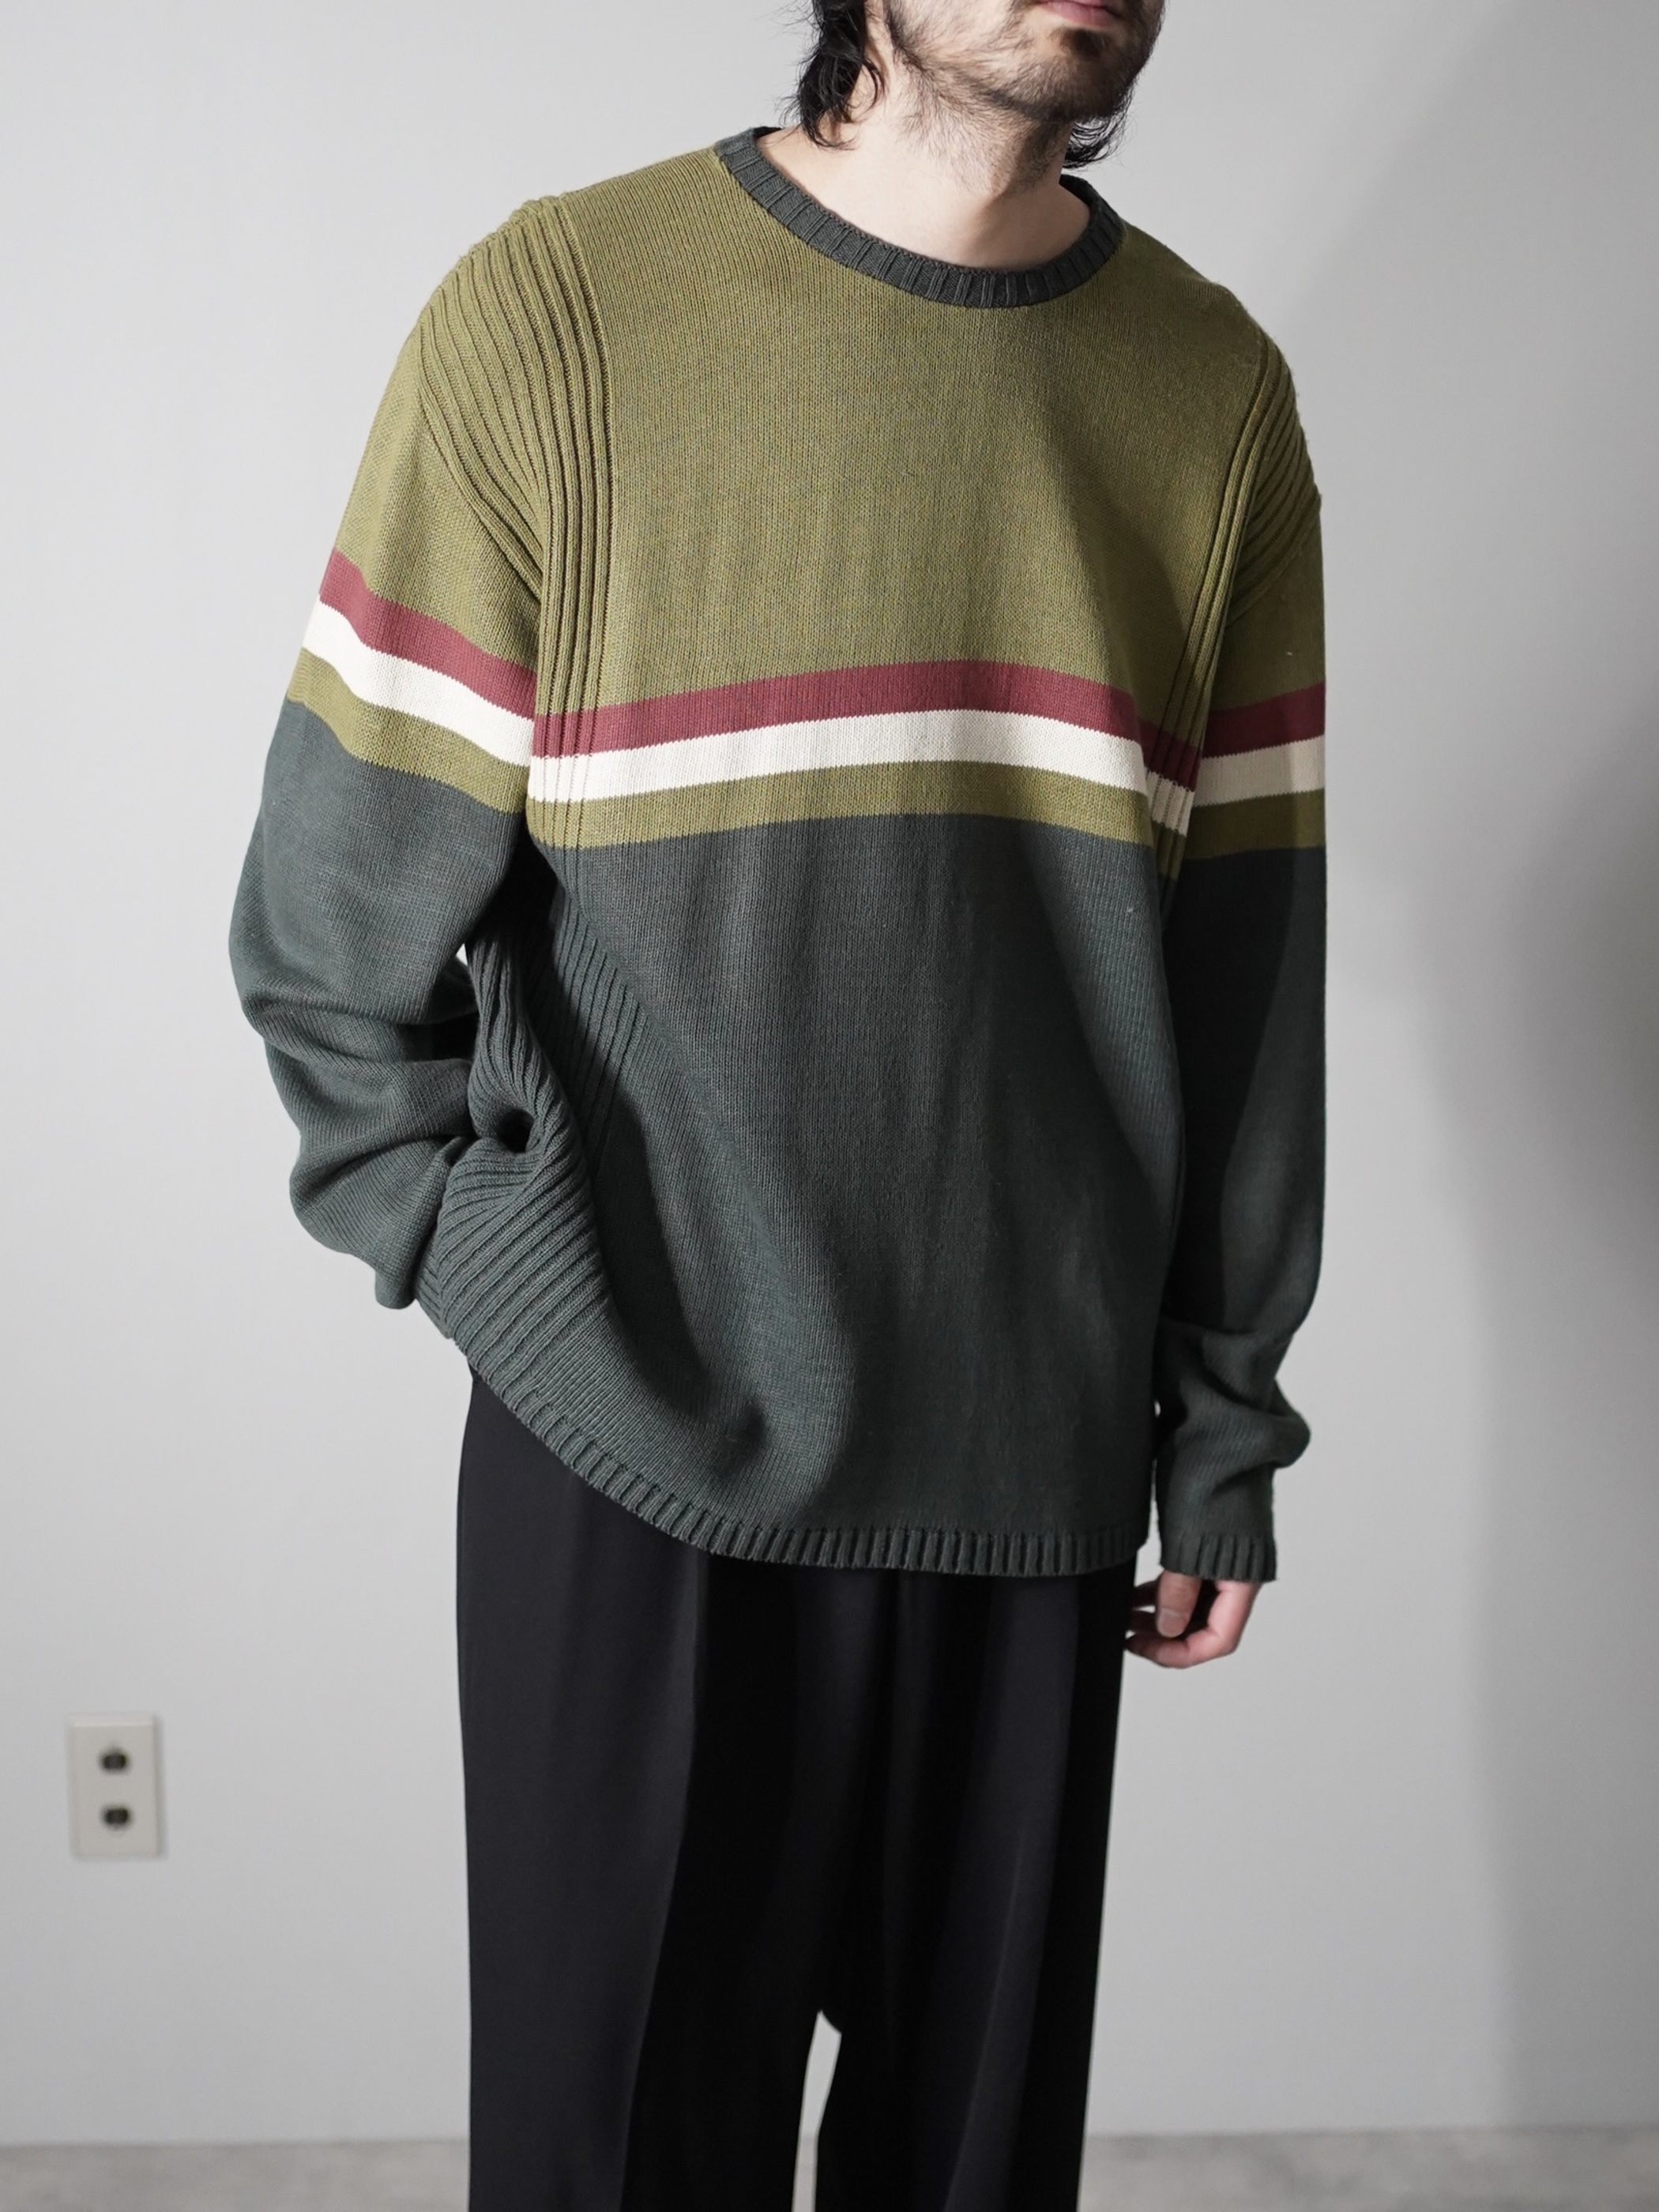 1990's 33 degrees cotton line design sweater / Made in USA